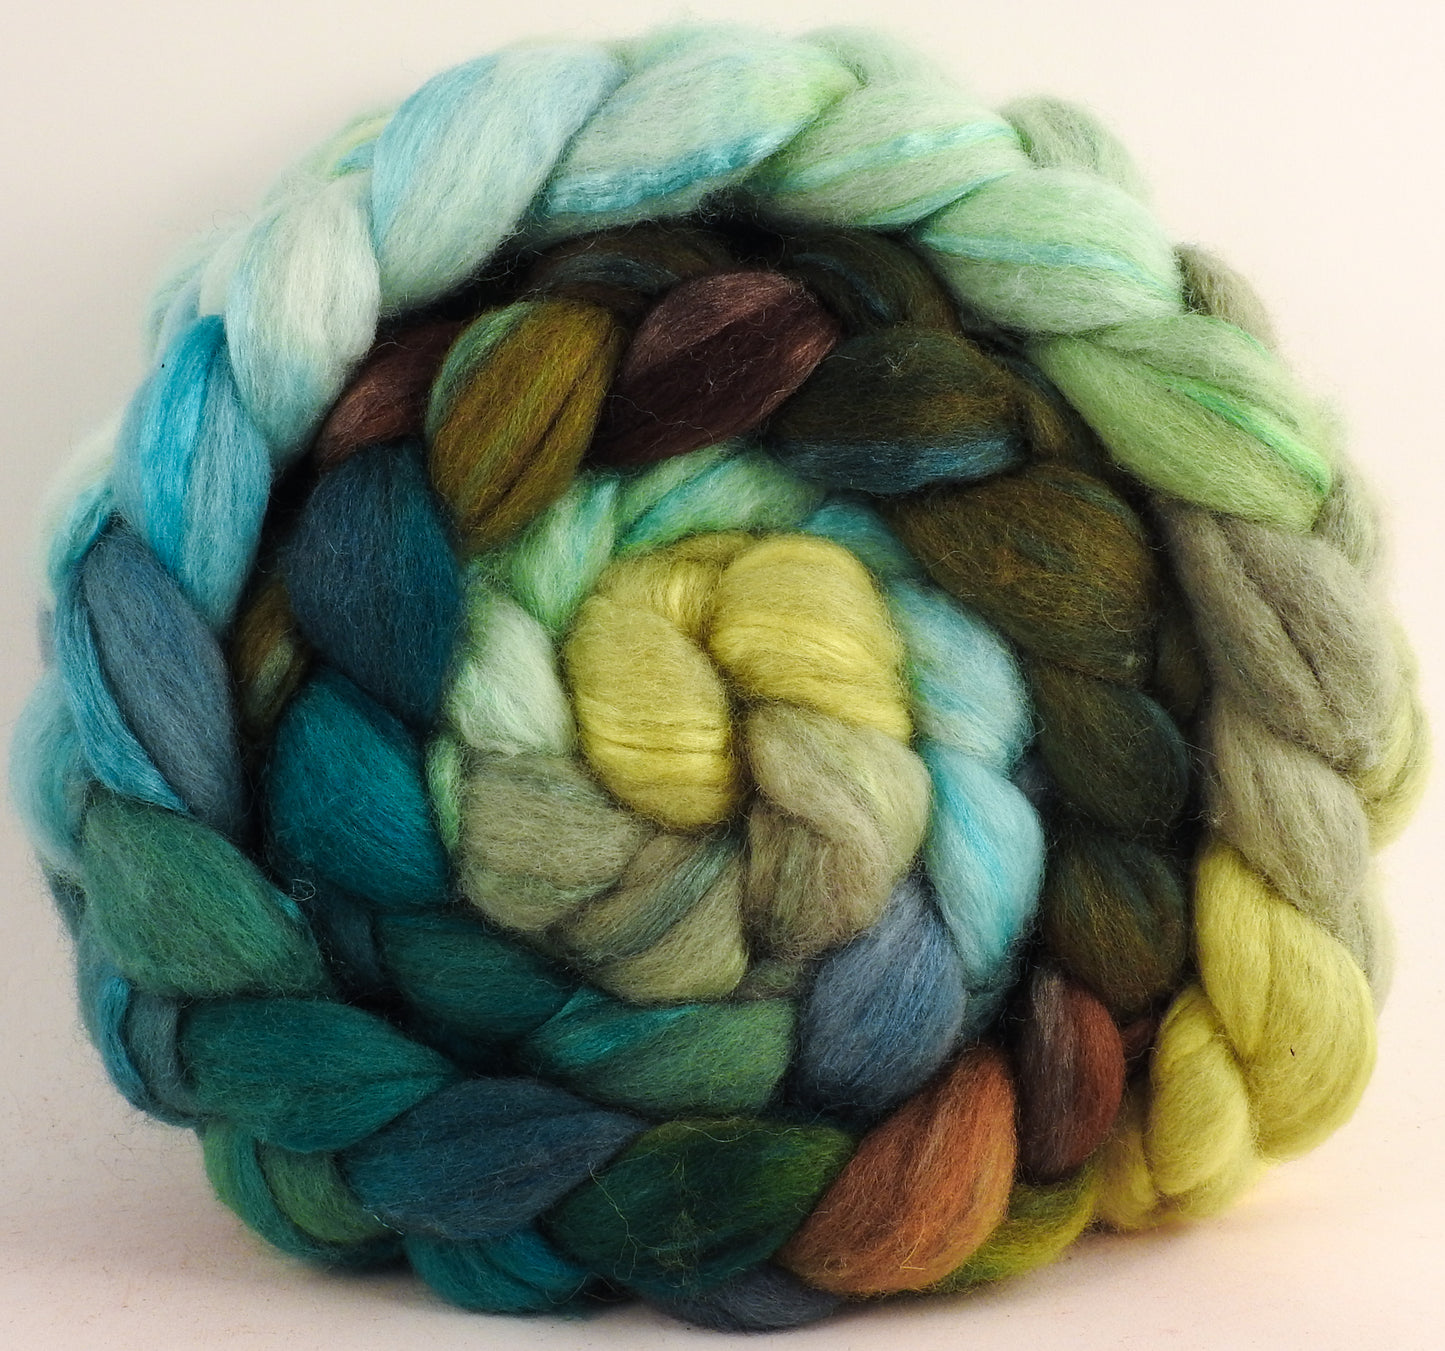 Blue-faced Leicester/ Tussah Silk (70/30) -Dryad - (5.8 oz.)